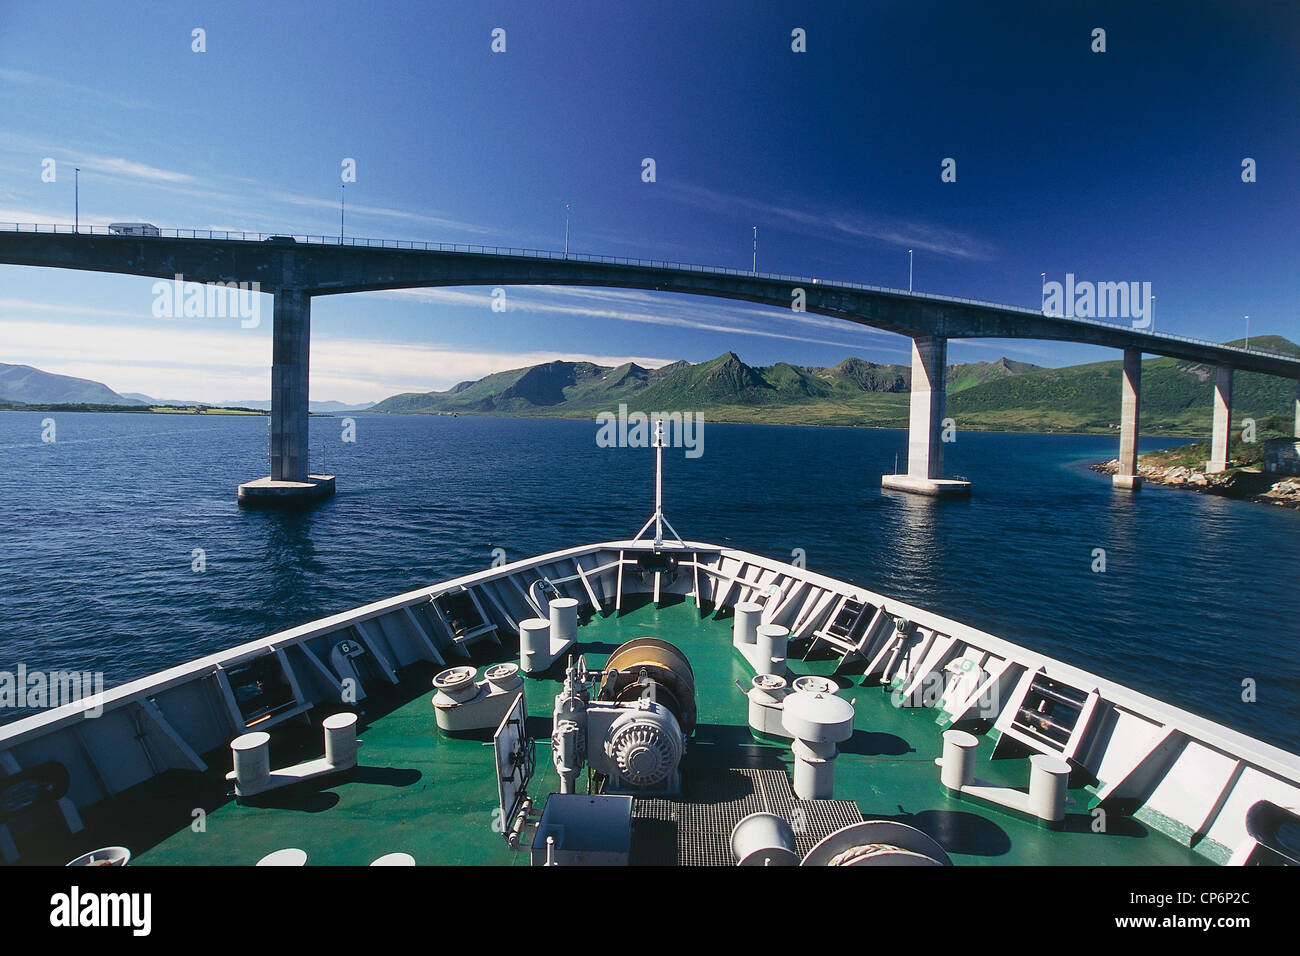 Norway - Nordland County - Vester?len - The bridge over the canal in Risoyrenna seen from the bow Hurtigruten Stock Photo